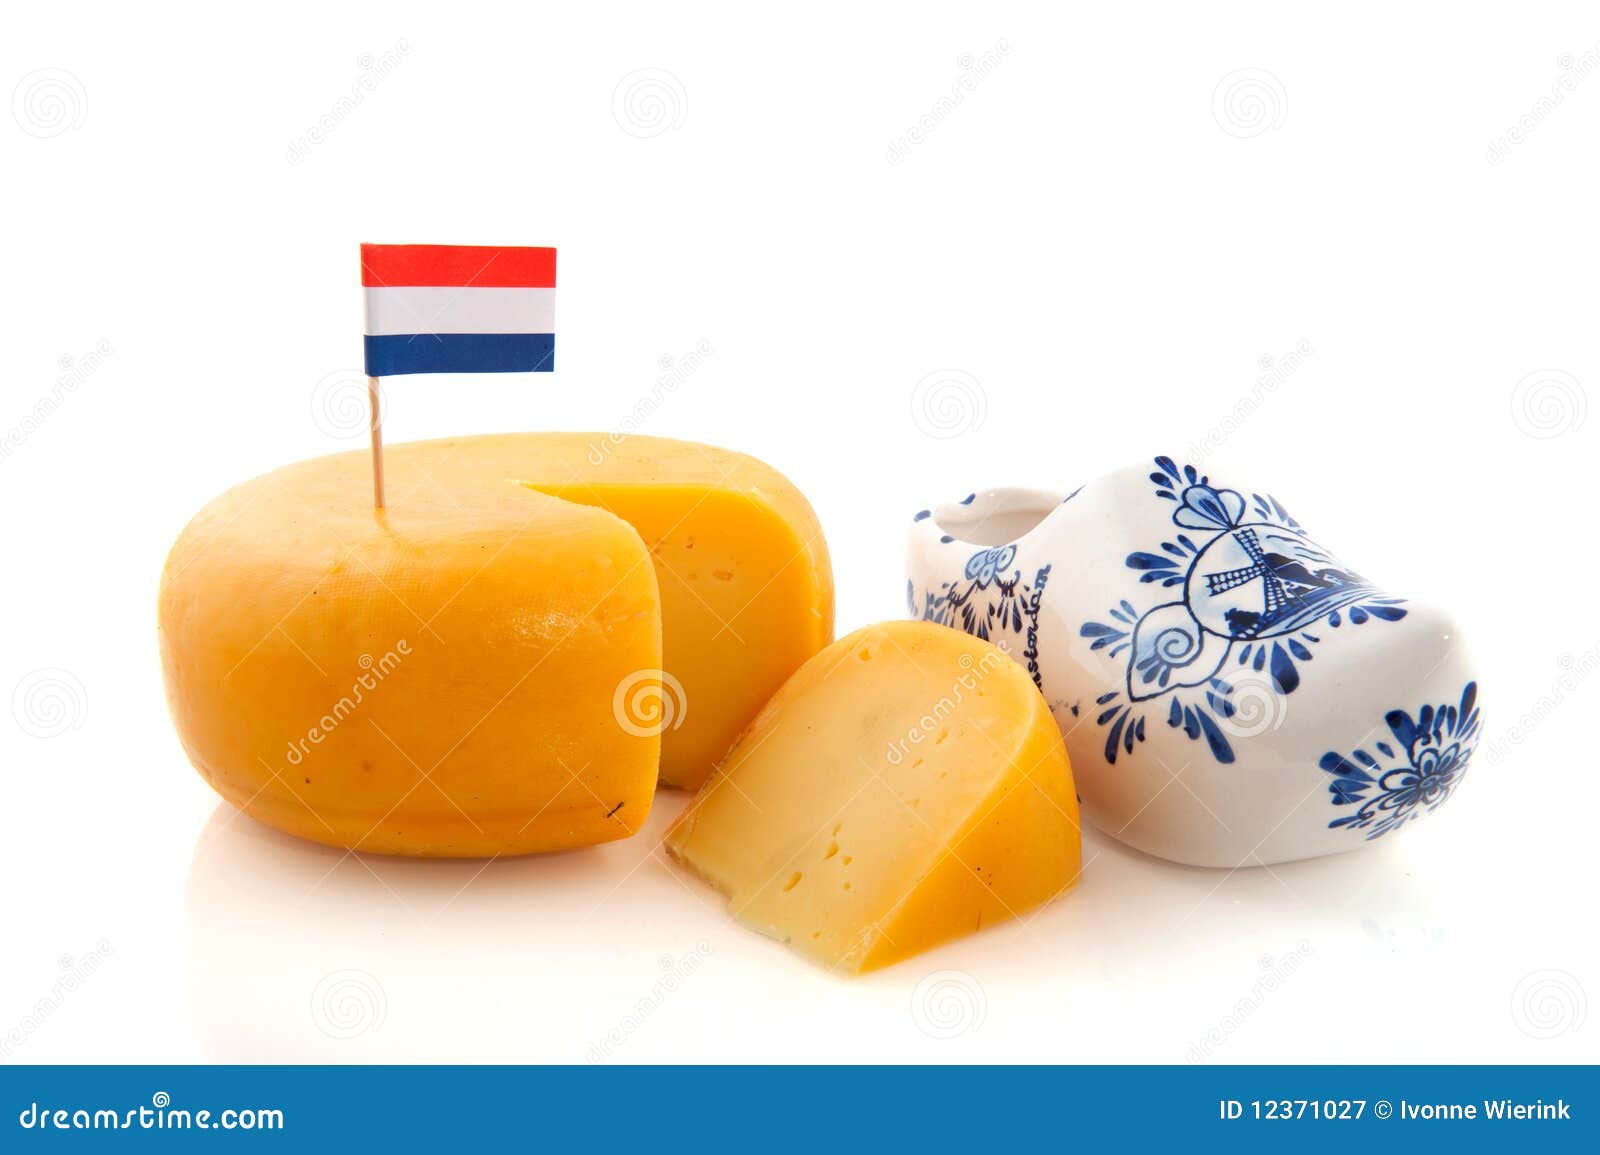 Dutch cheese stock image. Image of holland, product, clogs - 12371027